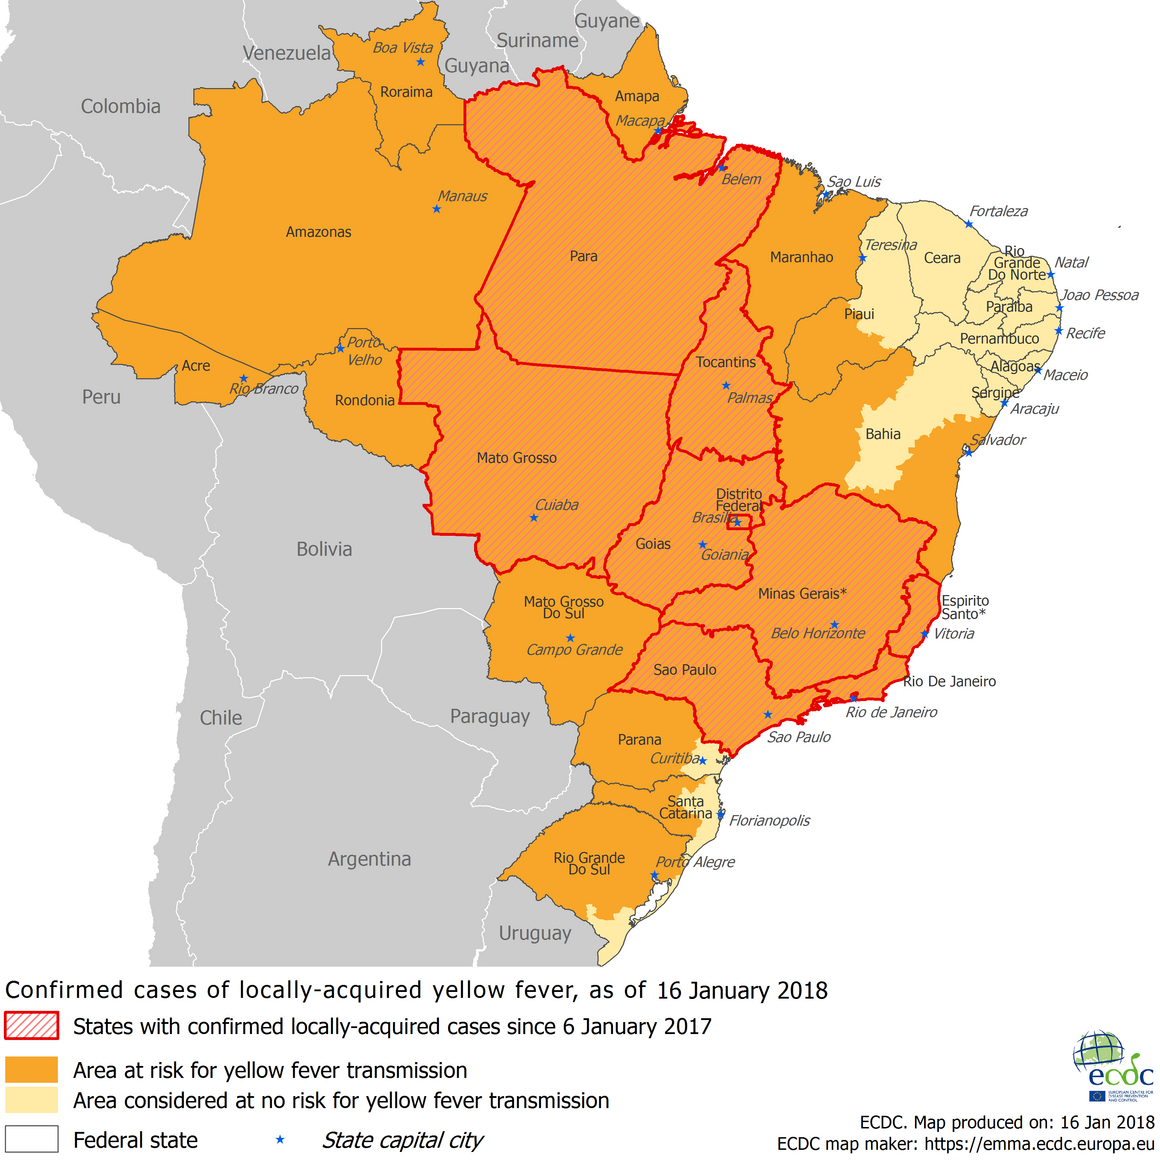 Yellow fever cases in Brazil, 16 January 2018